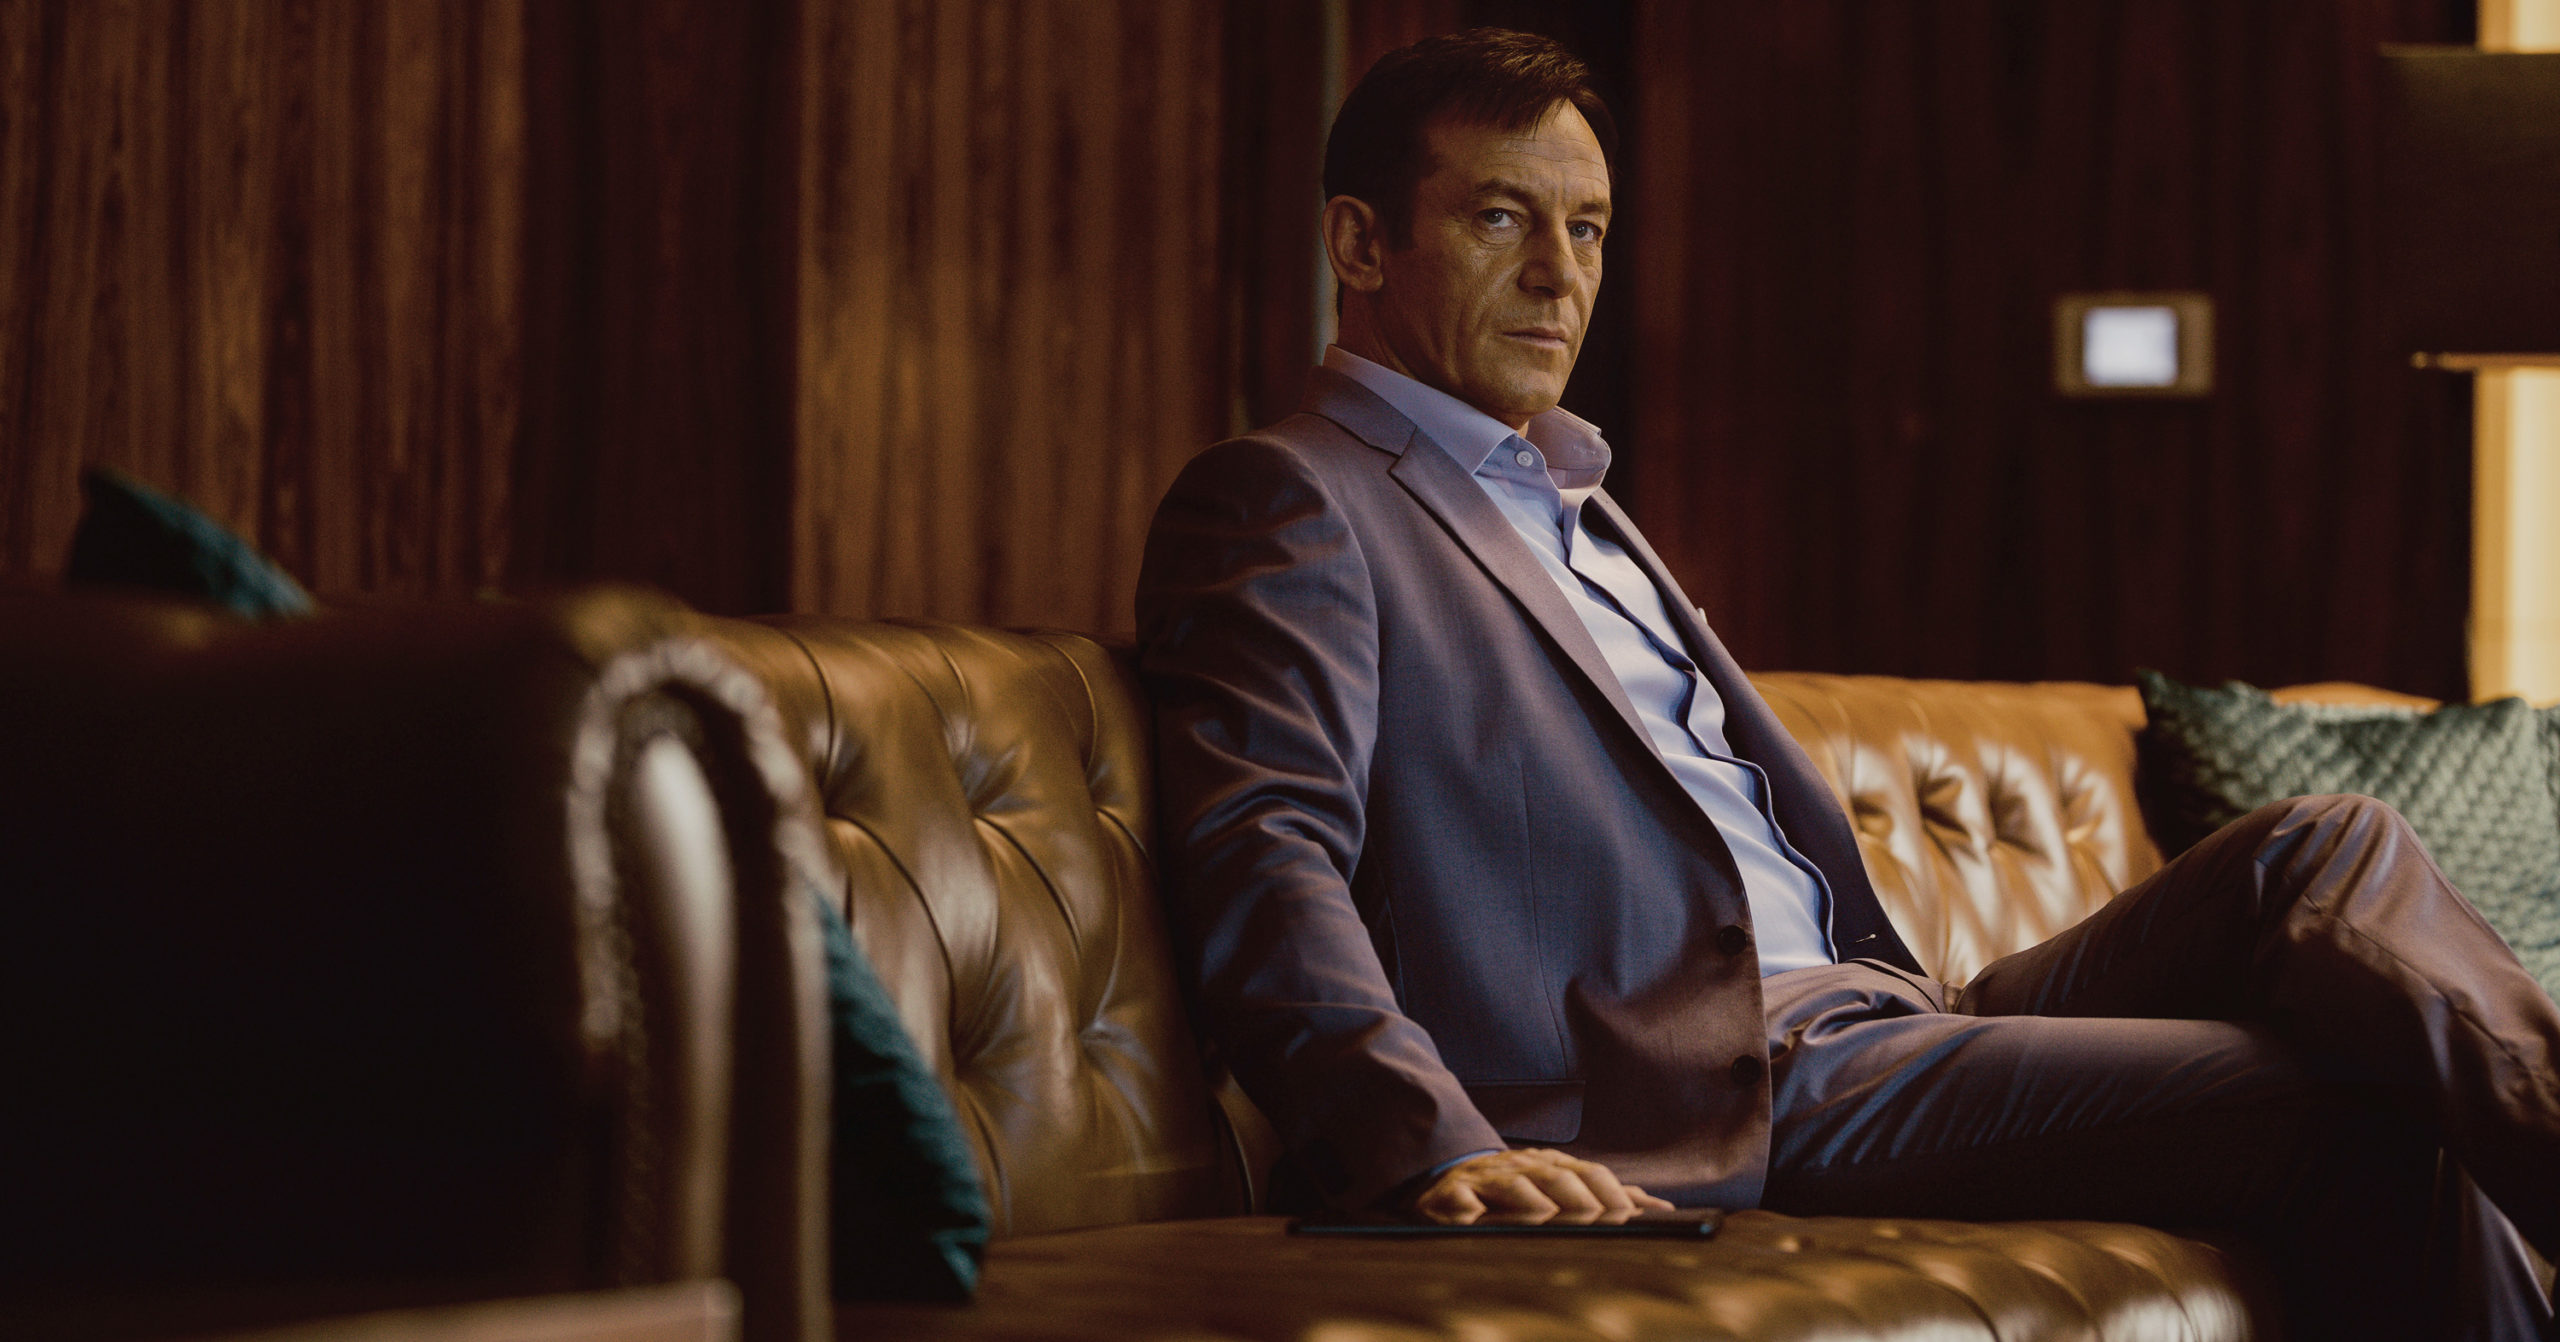 Jason Isaacs Return To Star Wars - Why Is Actor So Scared Of Lucasfilm NDA?